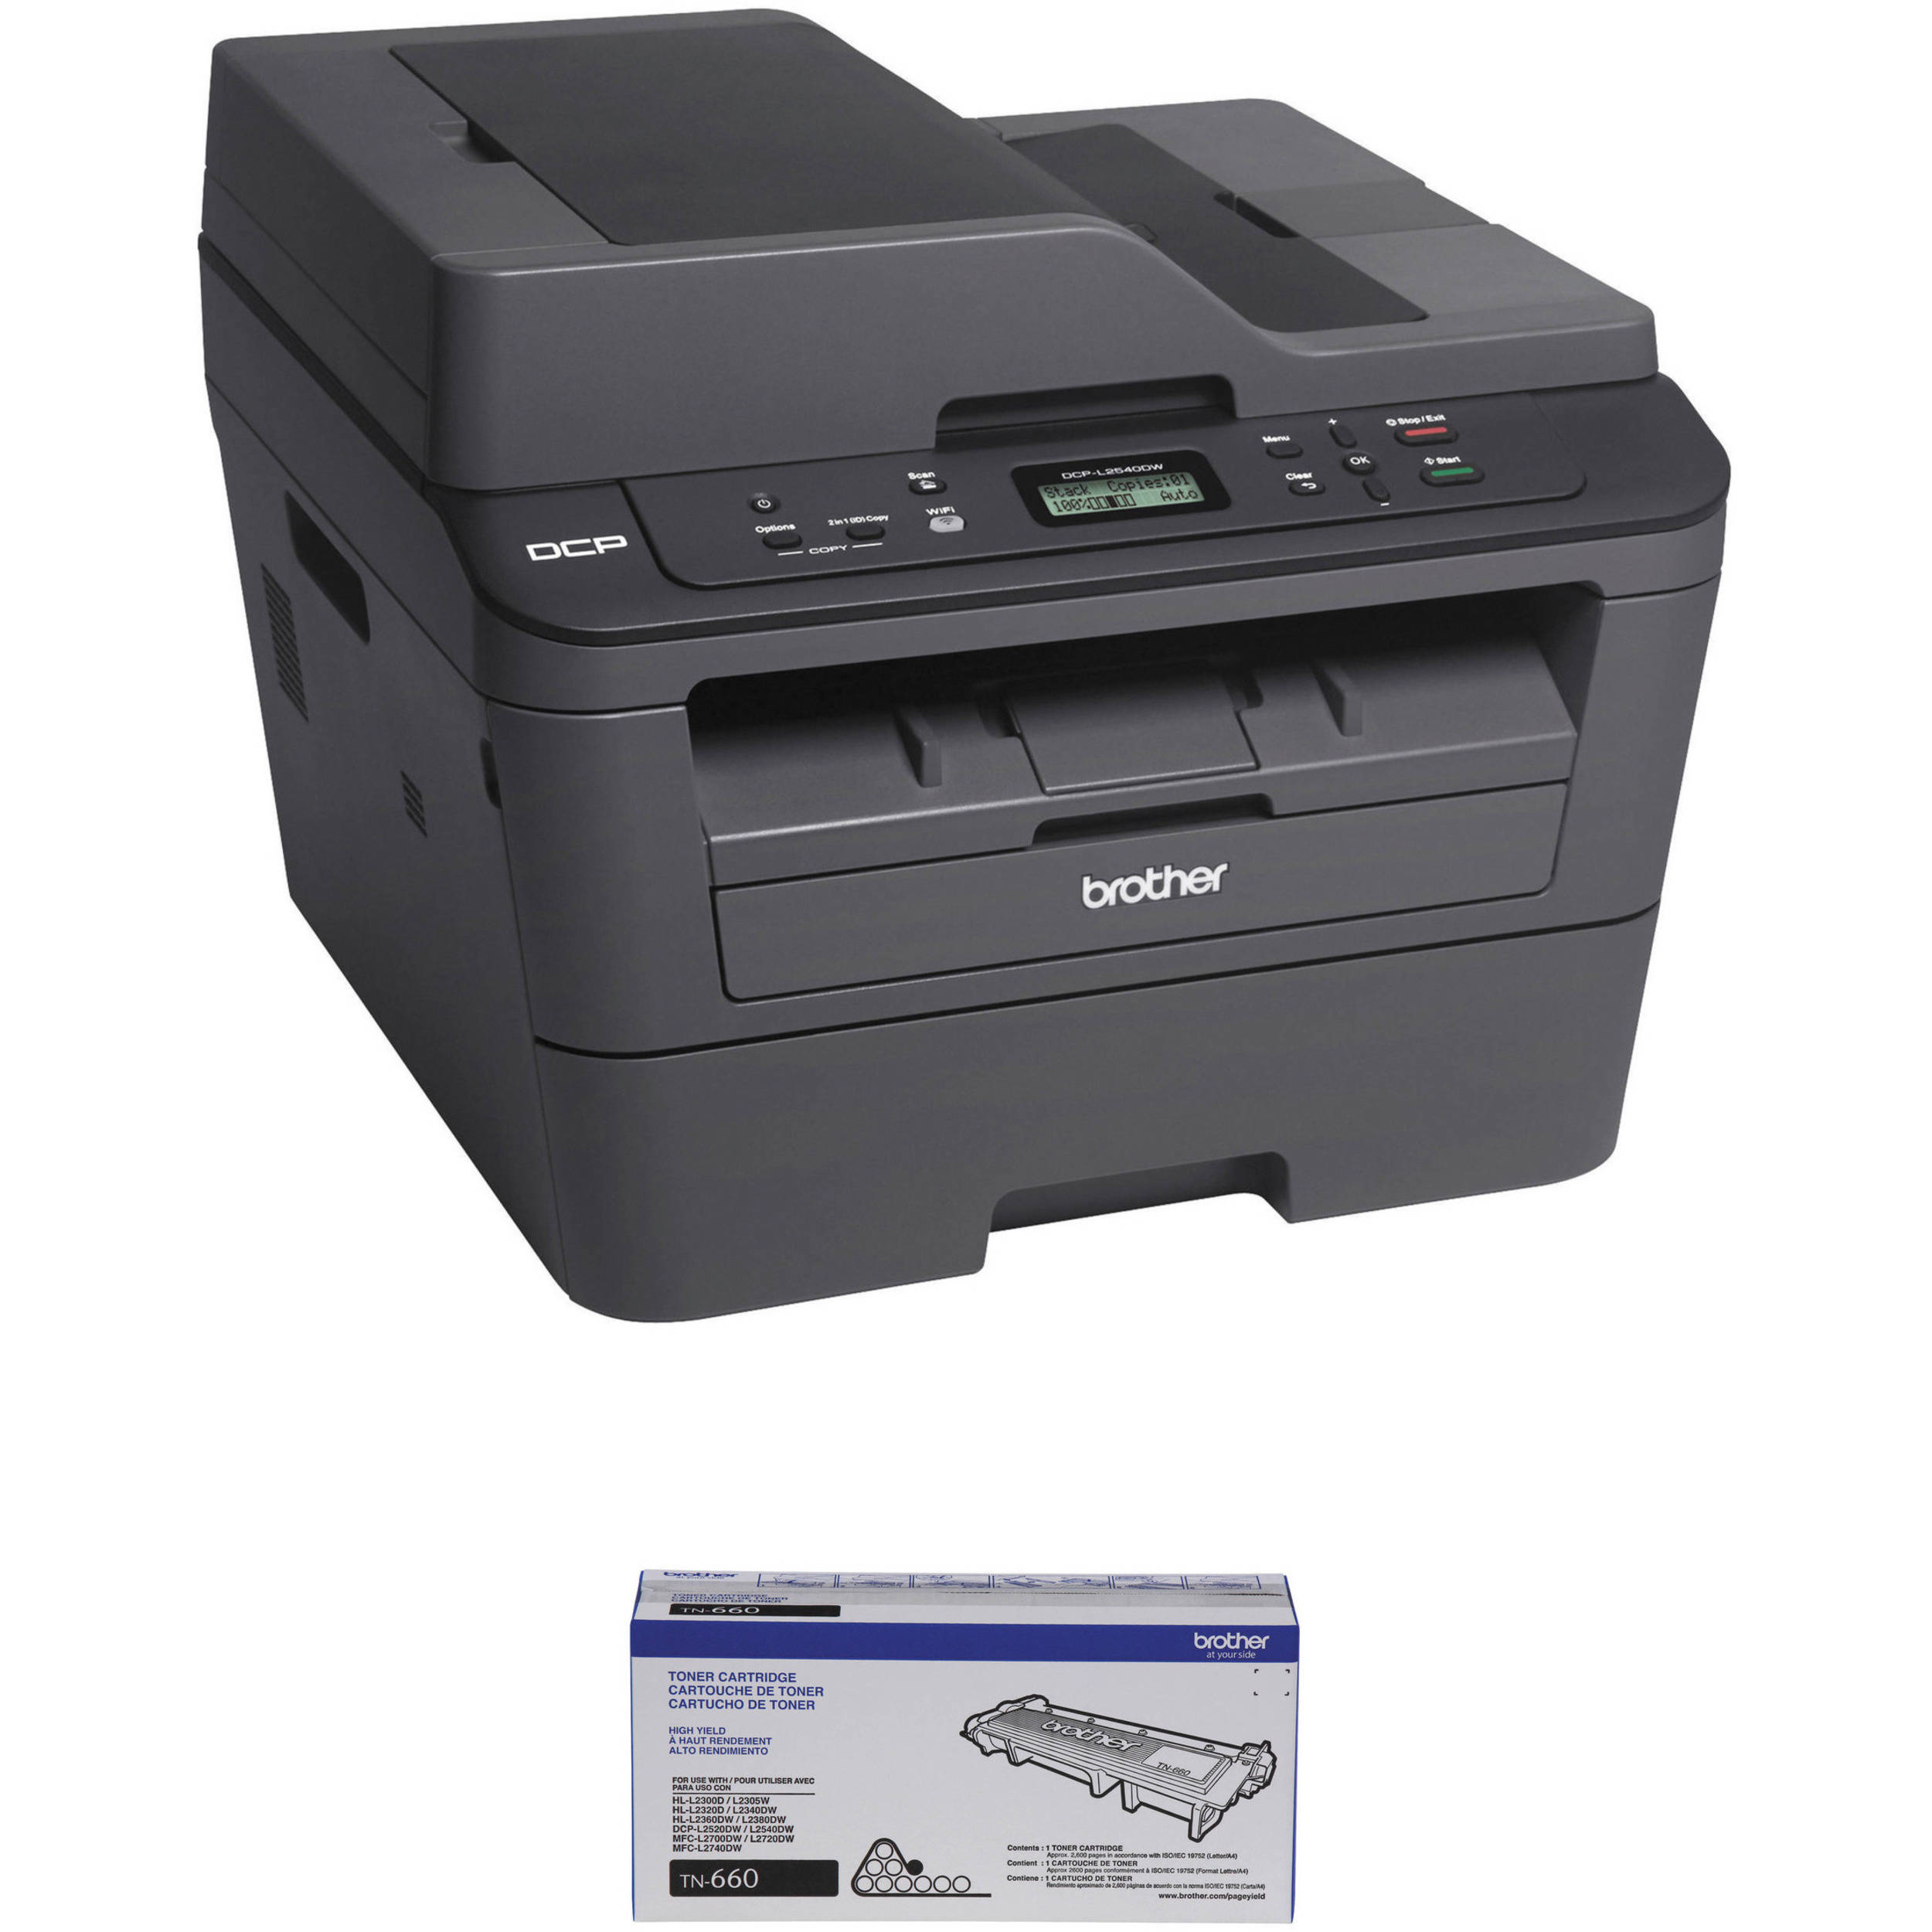 user instructions for brother printer dcp l2540 dw